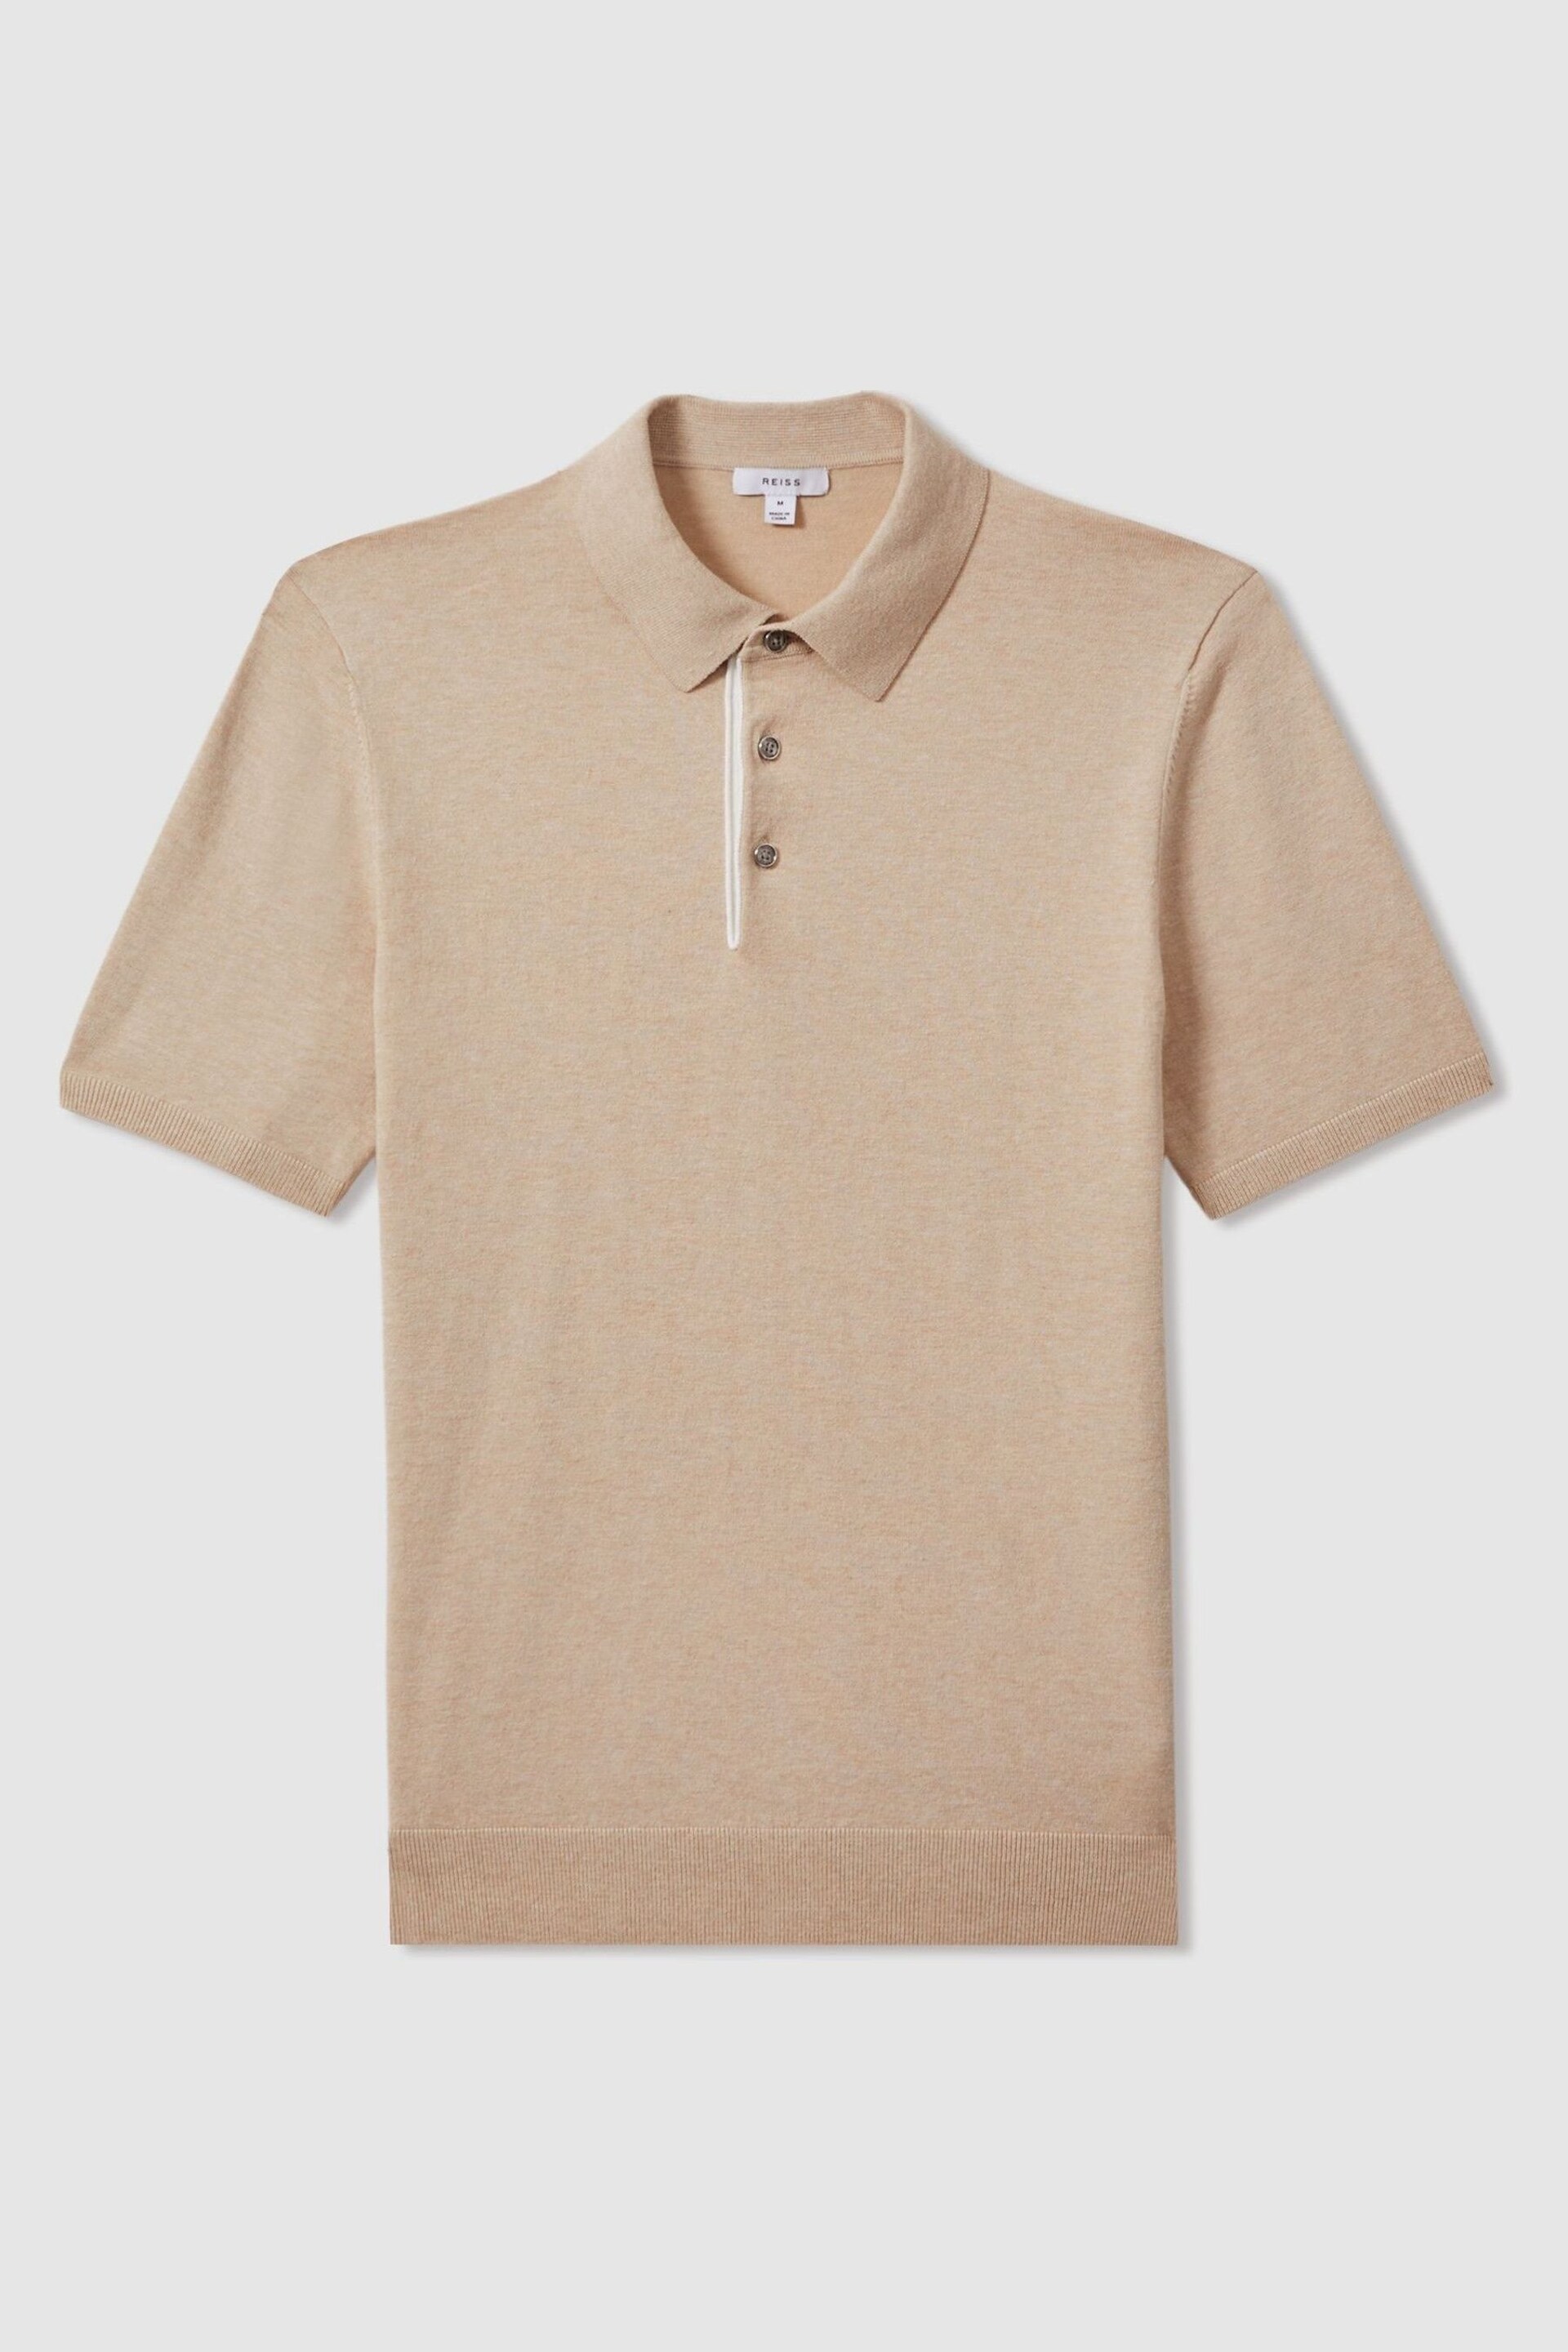 Reiss Camel Finch Cotton Blend Contrast Polo Shirt - Image 2 of 5